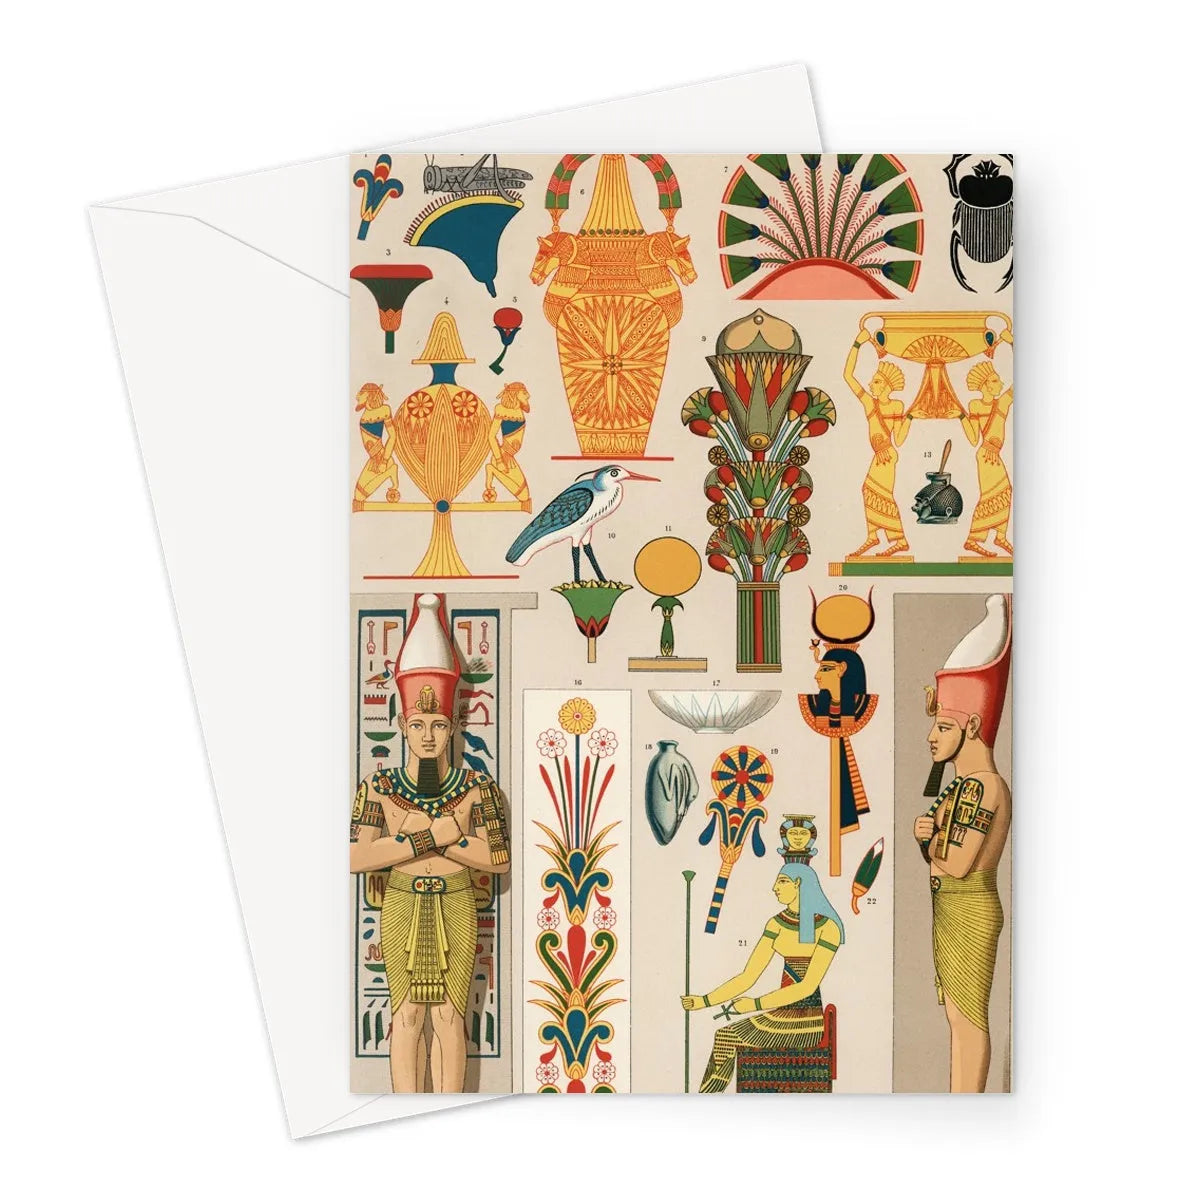 Egyptian Pattern By Auguste Racinet Greeting Card - A5 Portrait / 1 Card - Greeting & Note Cards - Aesthetic Art